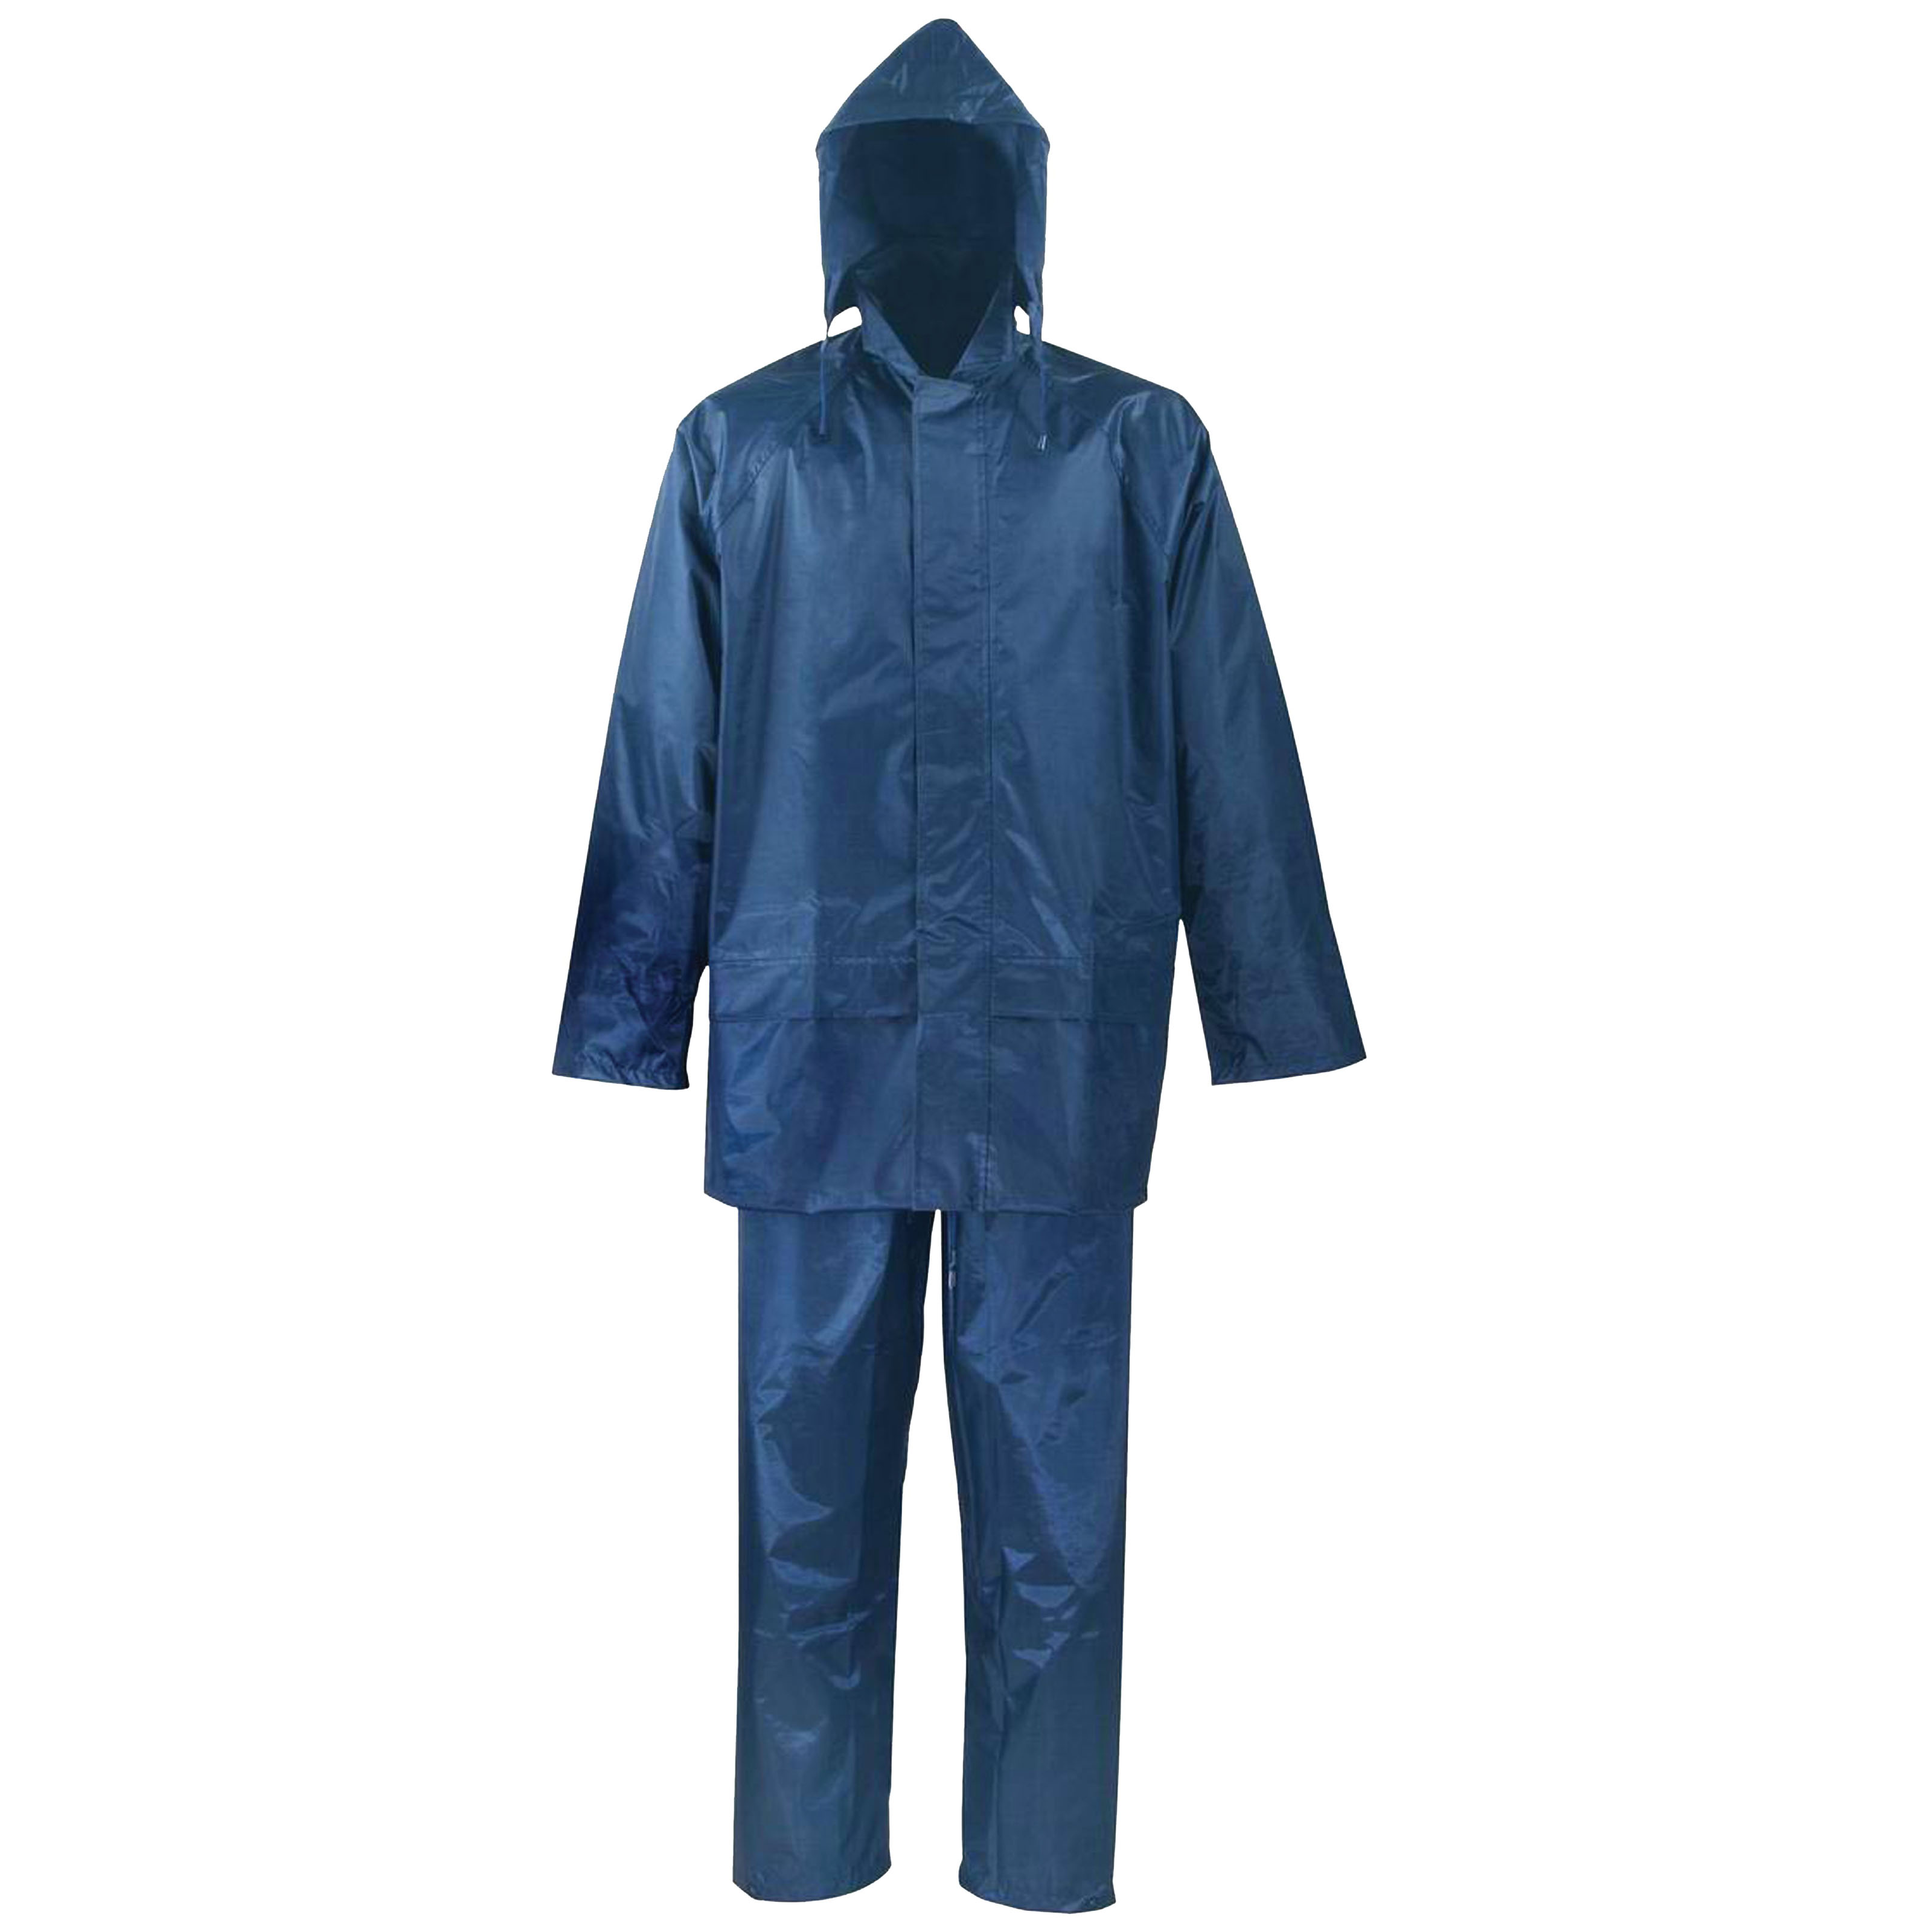 SPU045-XL Rain Suit, XL, 30-1/2 in Inseam, Polyester, Blue, Drawstring Pull-Out Hood Collar